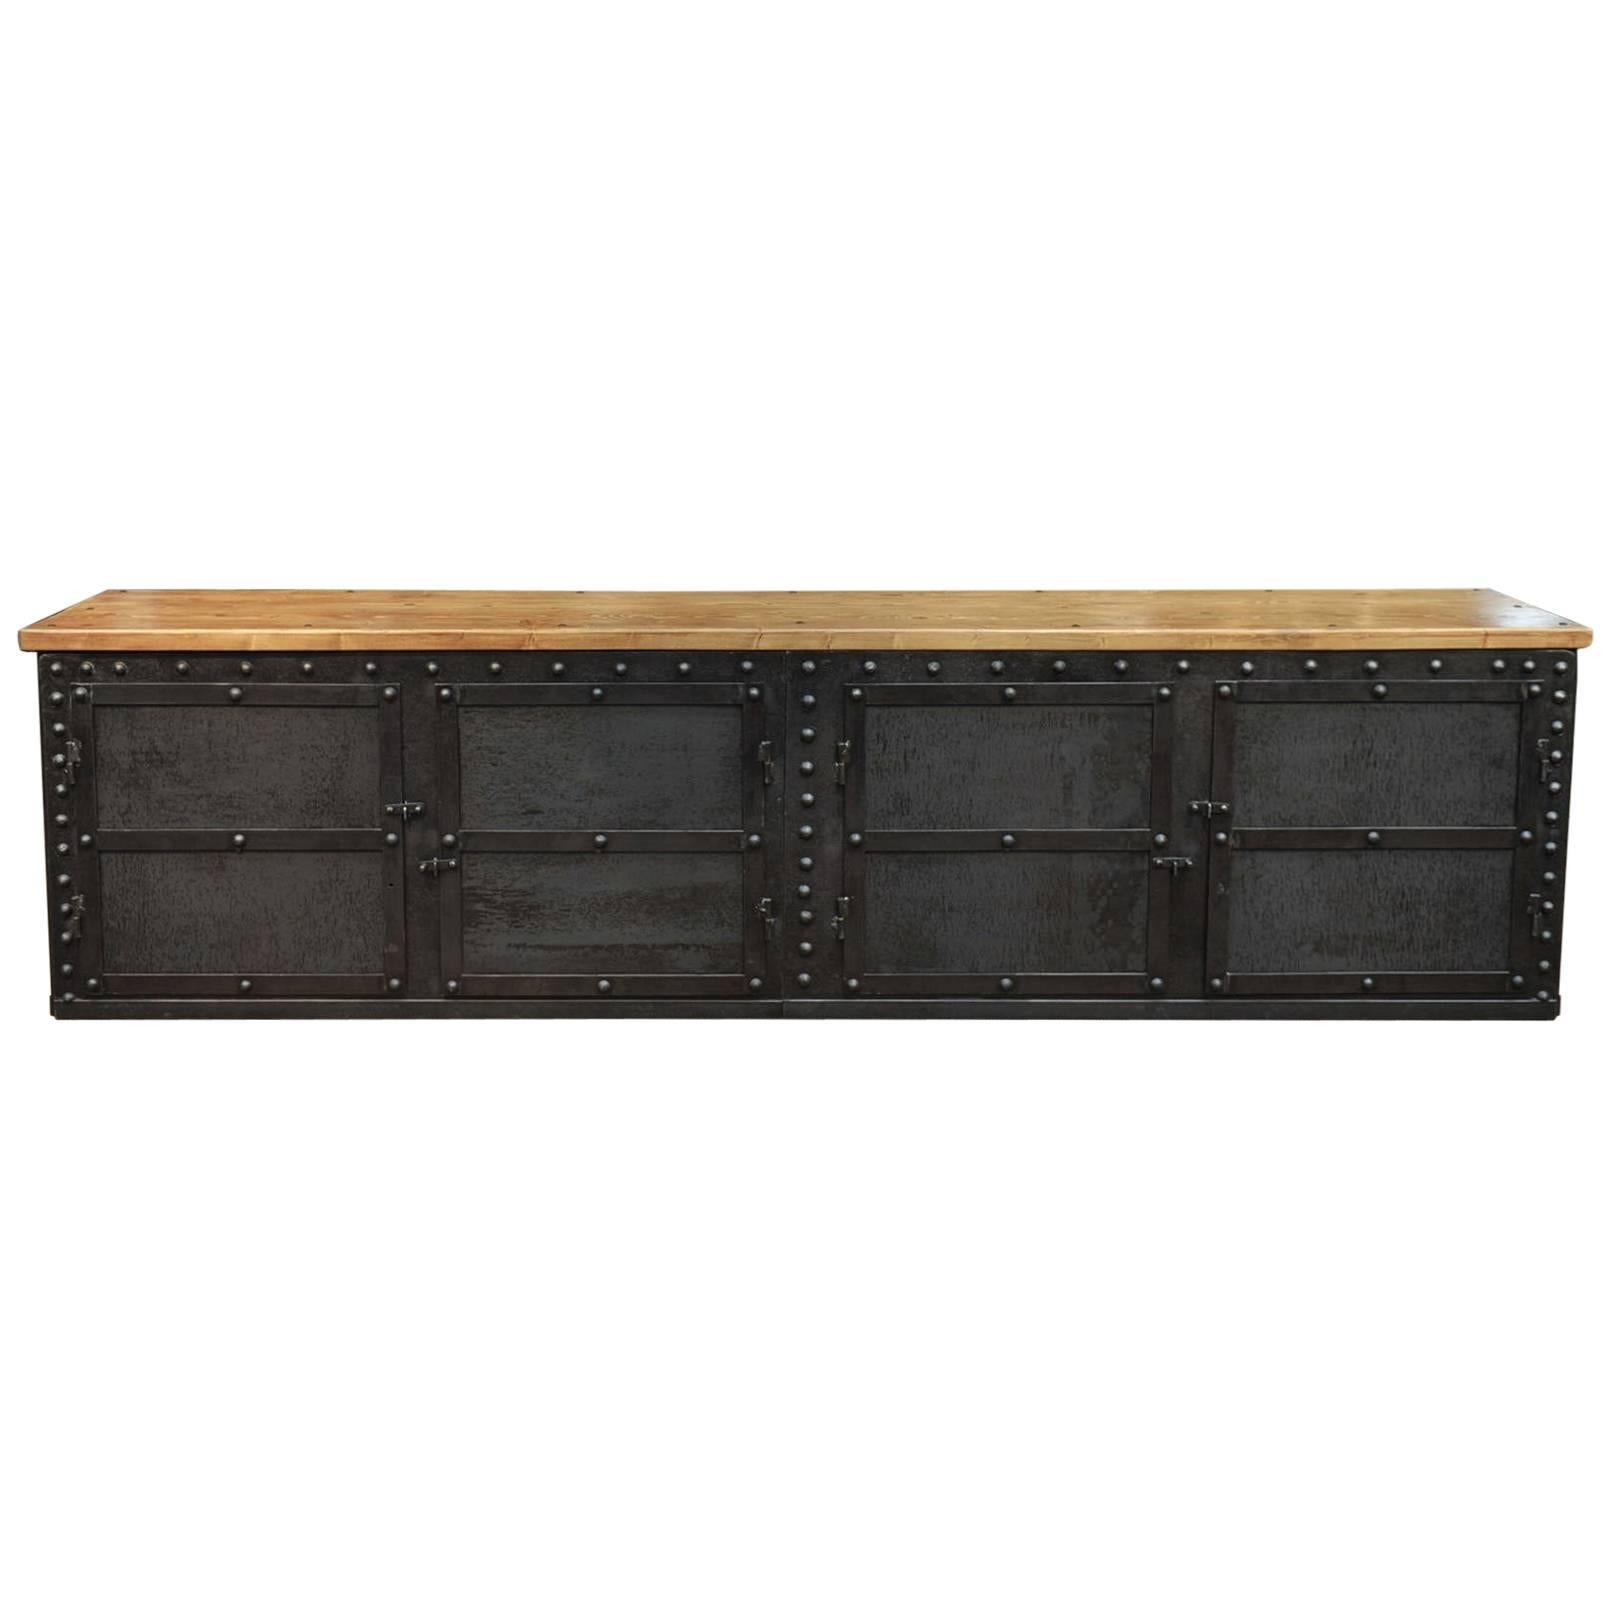 Four Doors Industrial Riveted Iron Credenza Cabinet, 1900